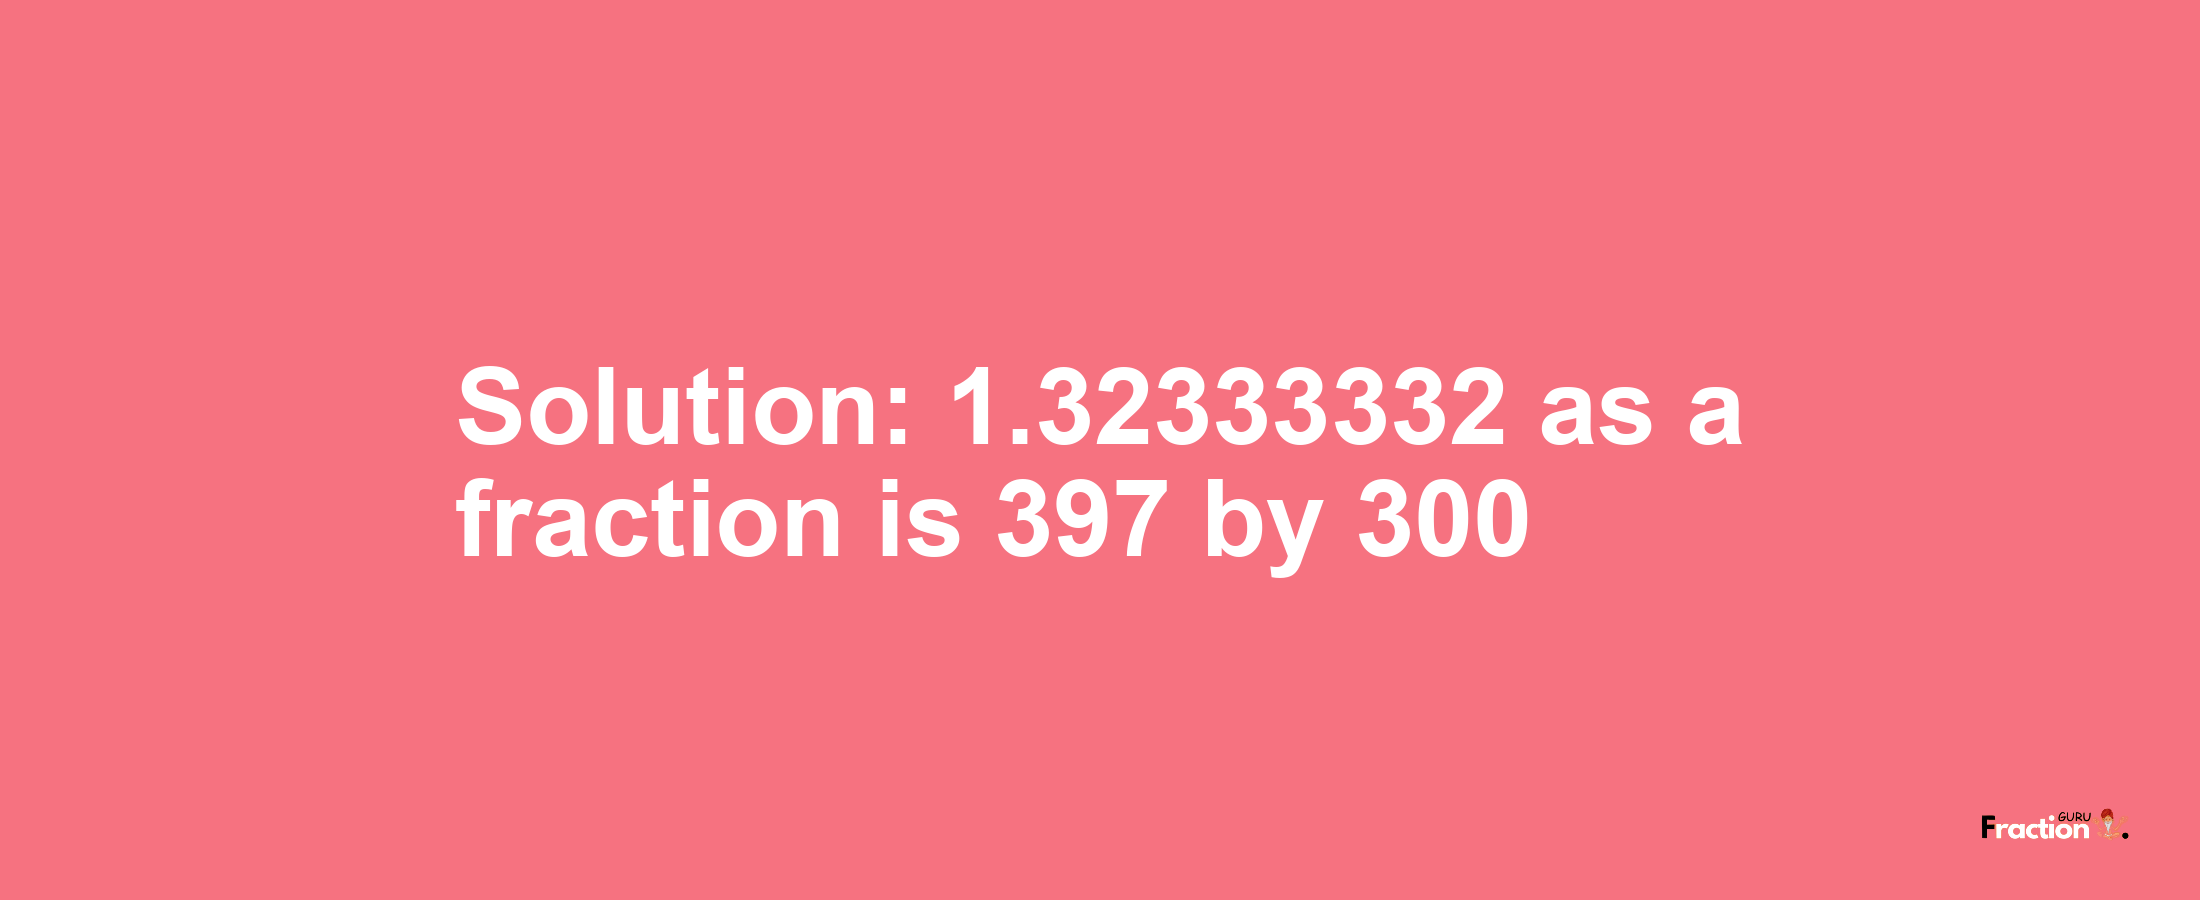 Solution:1.32333332 as a fraction is 397/300